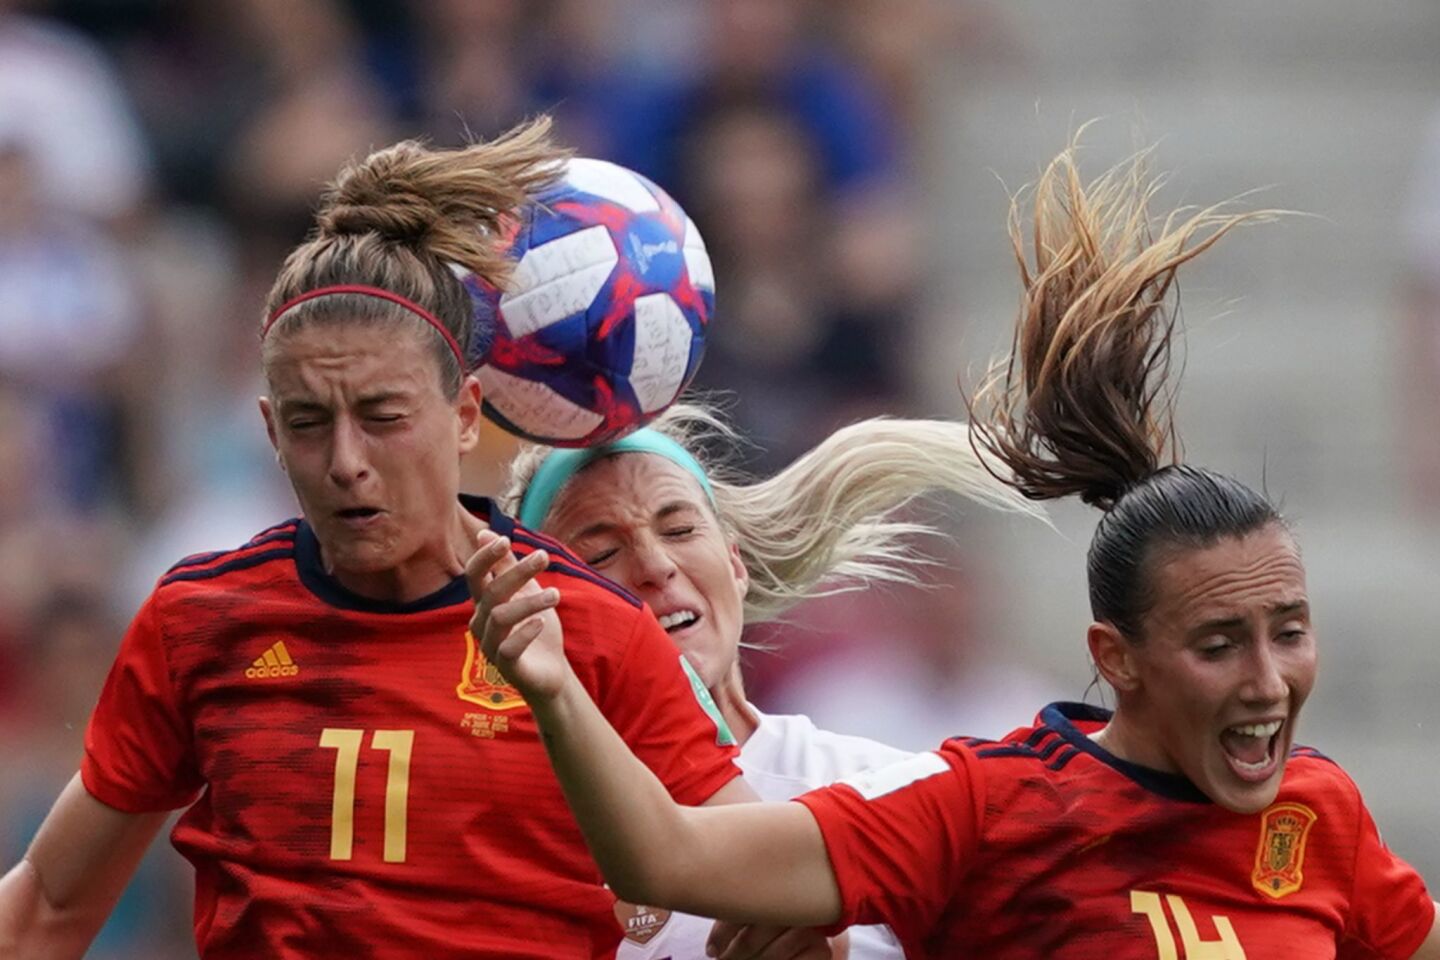 U.S. midfielder Julie Ertz vies with Spain's Alexia Putellas, left, and Virgina Torrecilla on Monday at the Women's World Cup in Reims, France.